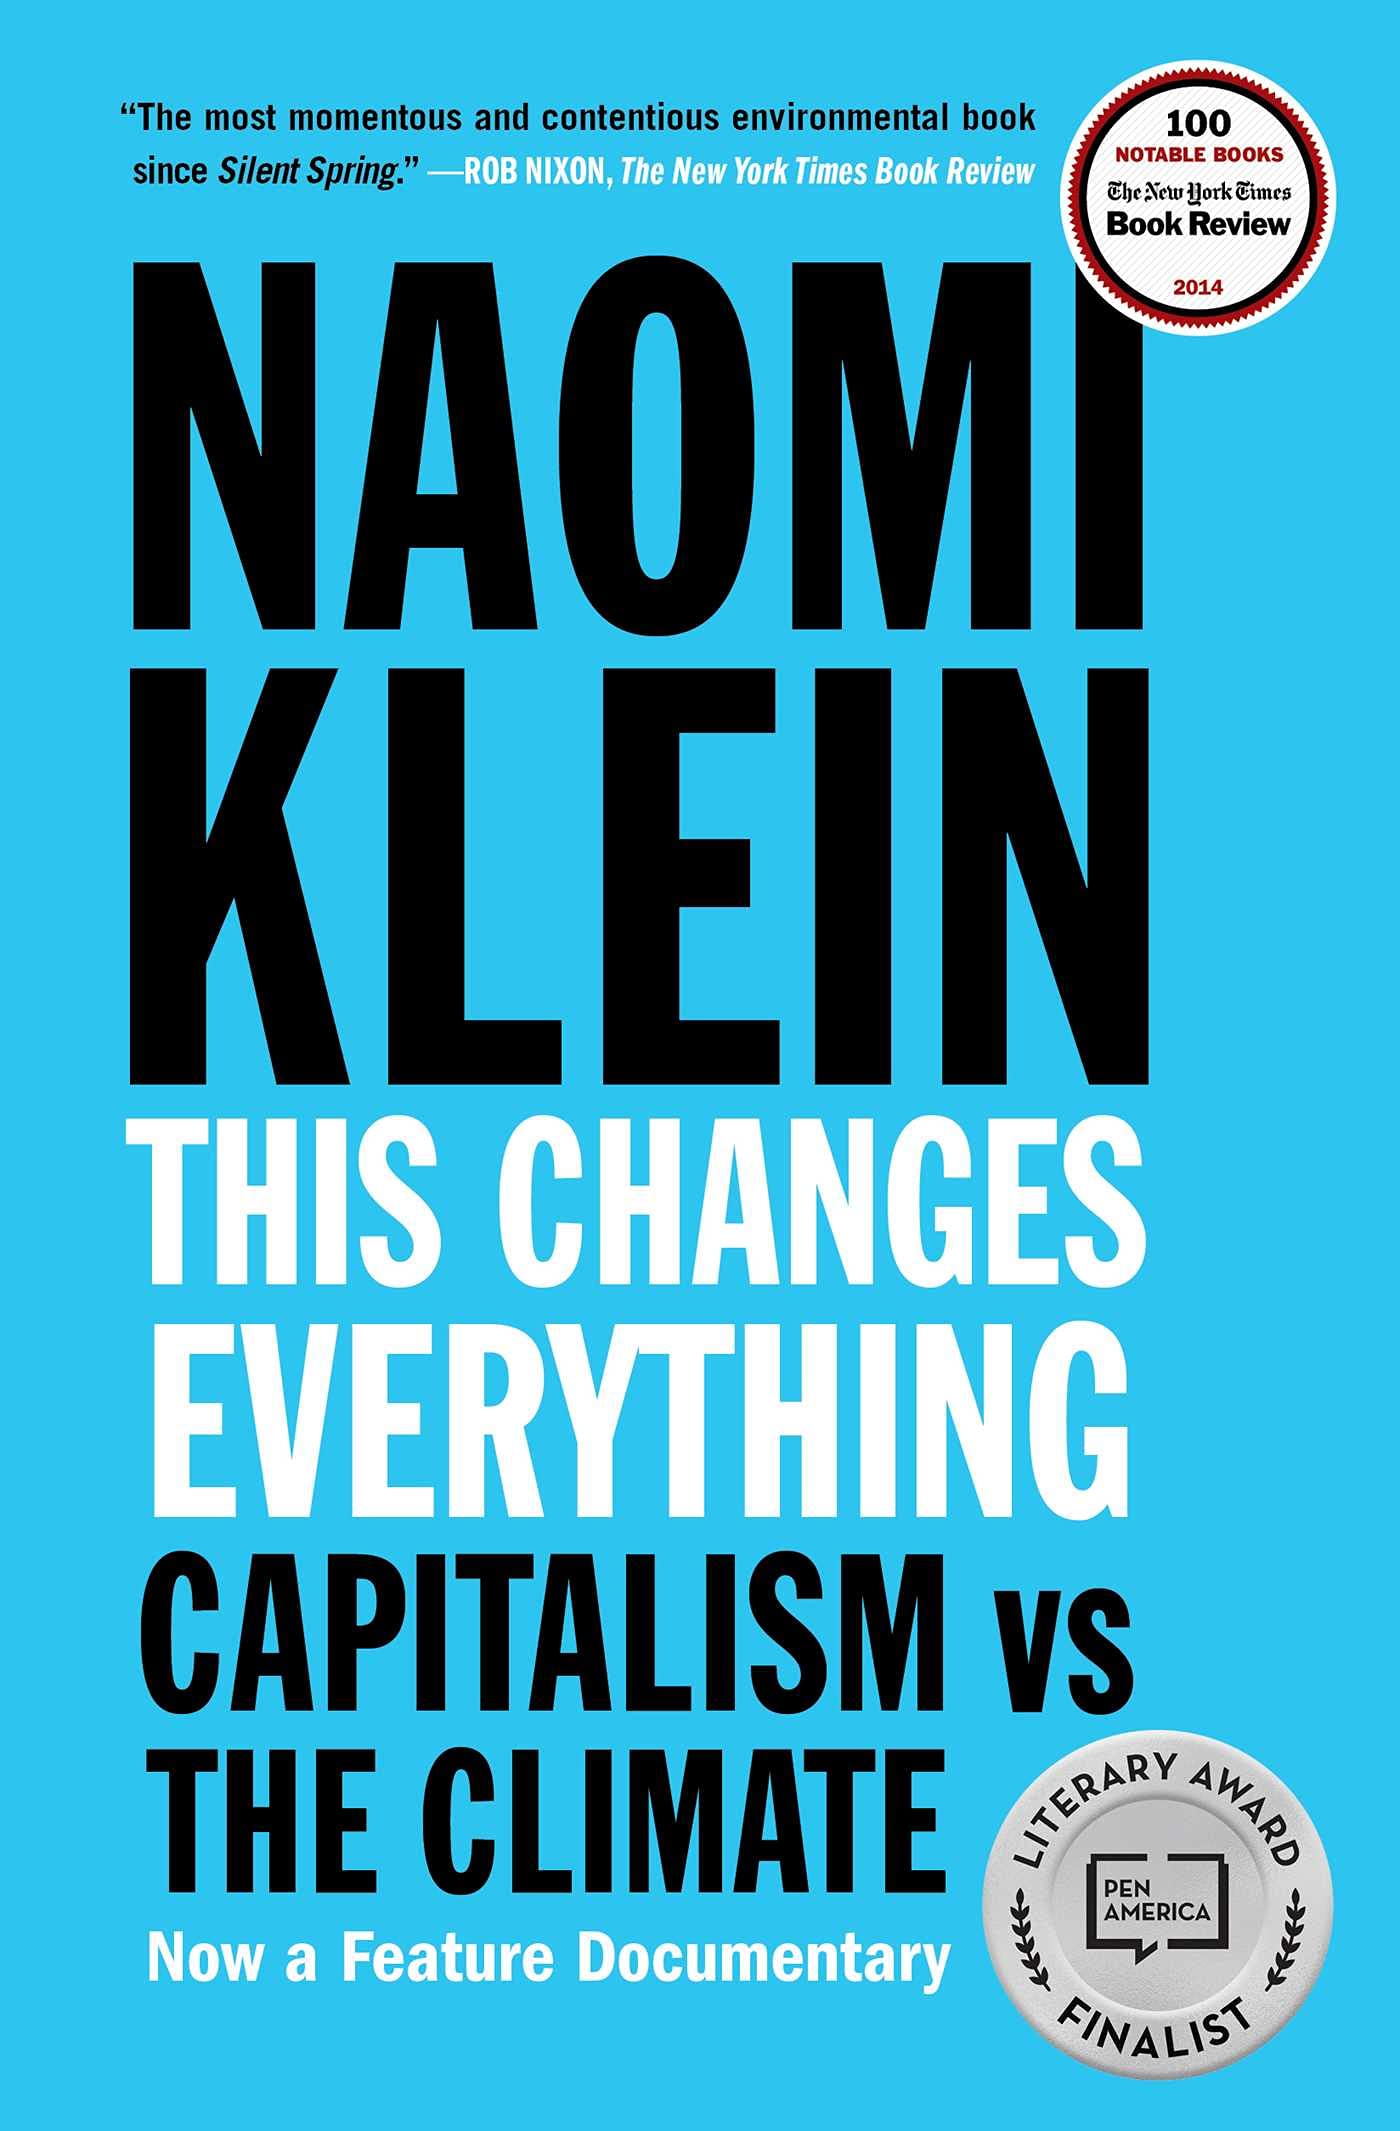 This Changes Everything: Capitalism vs. the Climate, by Naomi Klein